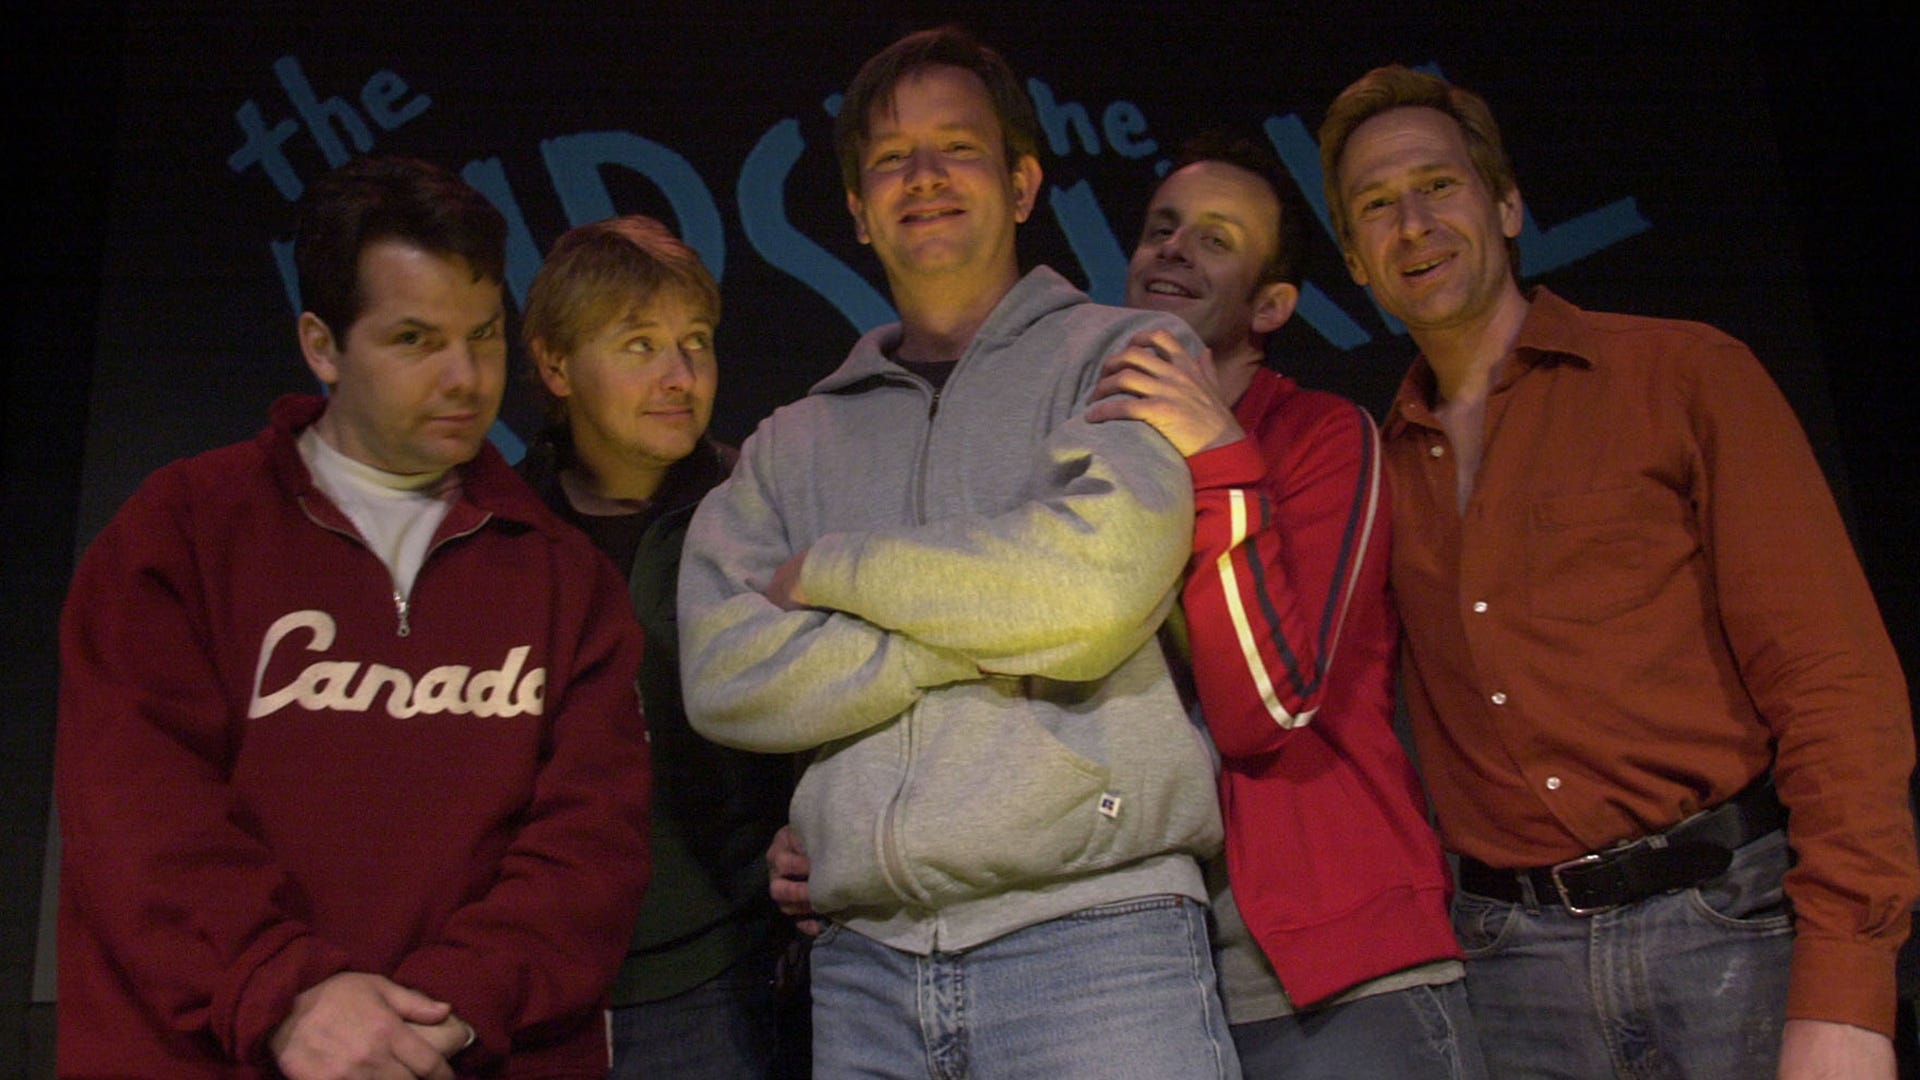 Bruce McCulloch, Dave Foley, Mark McKinney, Kevin McDonald, and Scott Thompson, Kids in the Hall